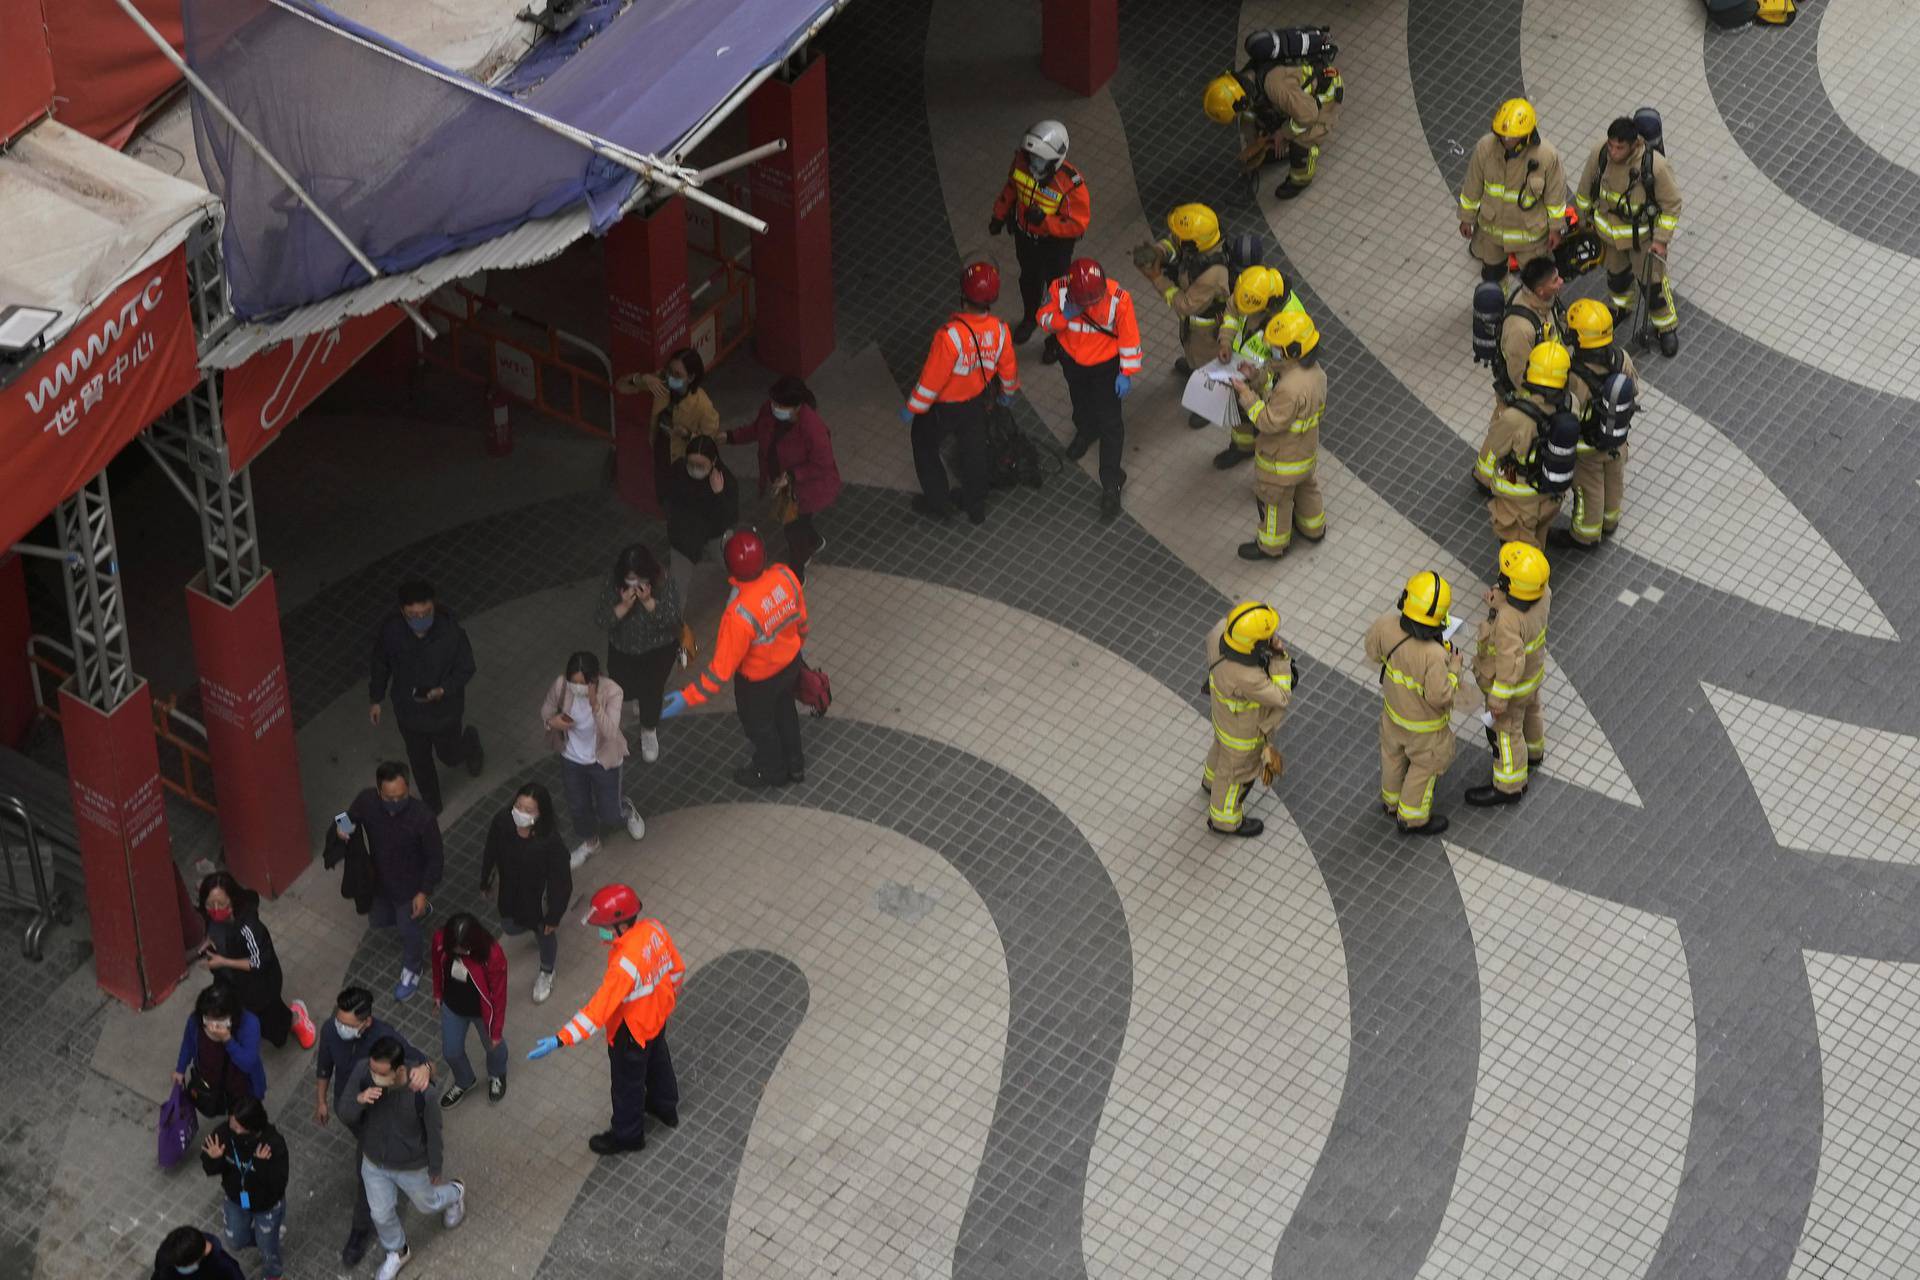 Fire breaks out at Hong Kong's World Trade centre